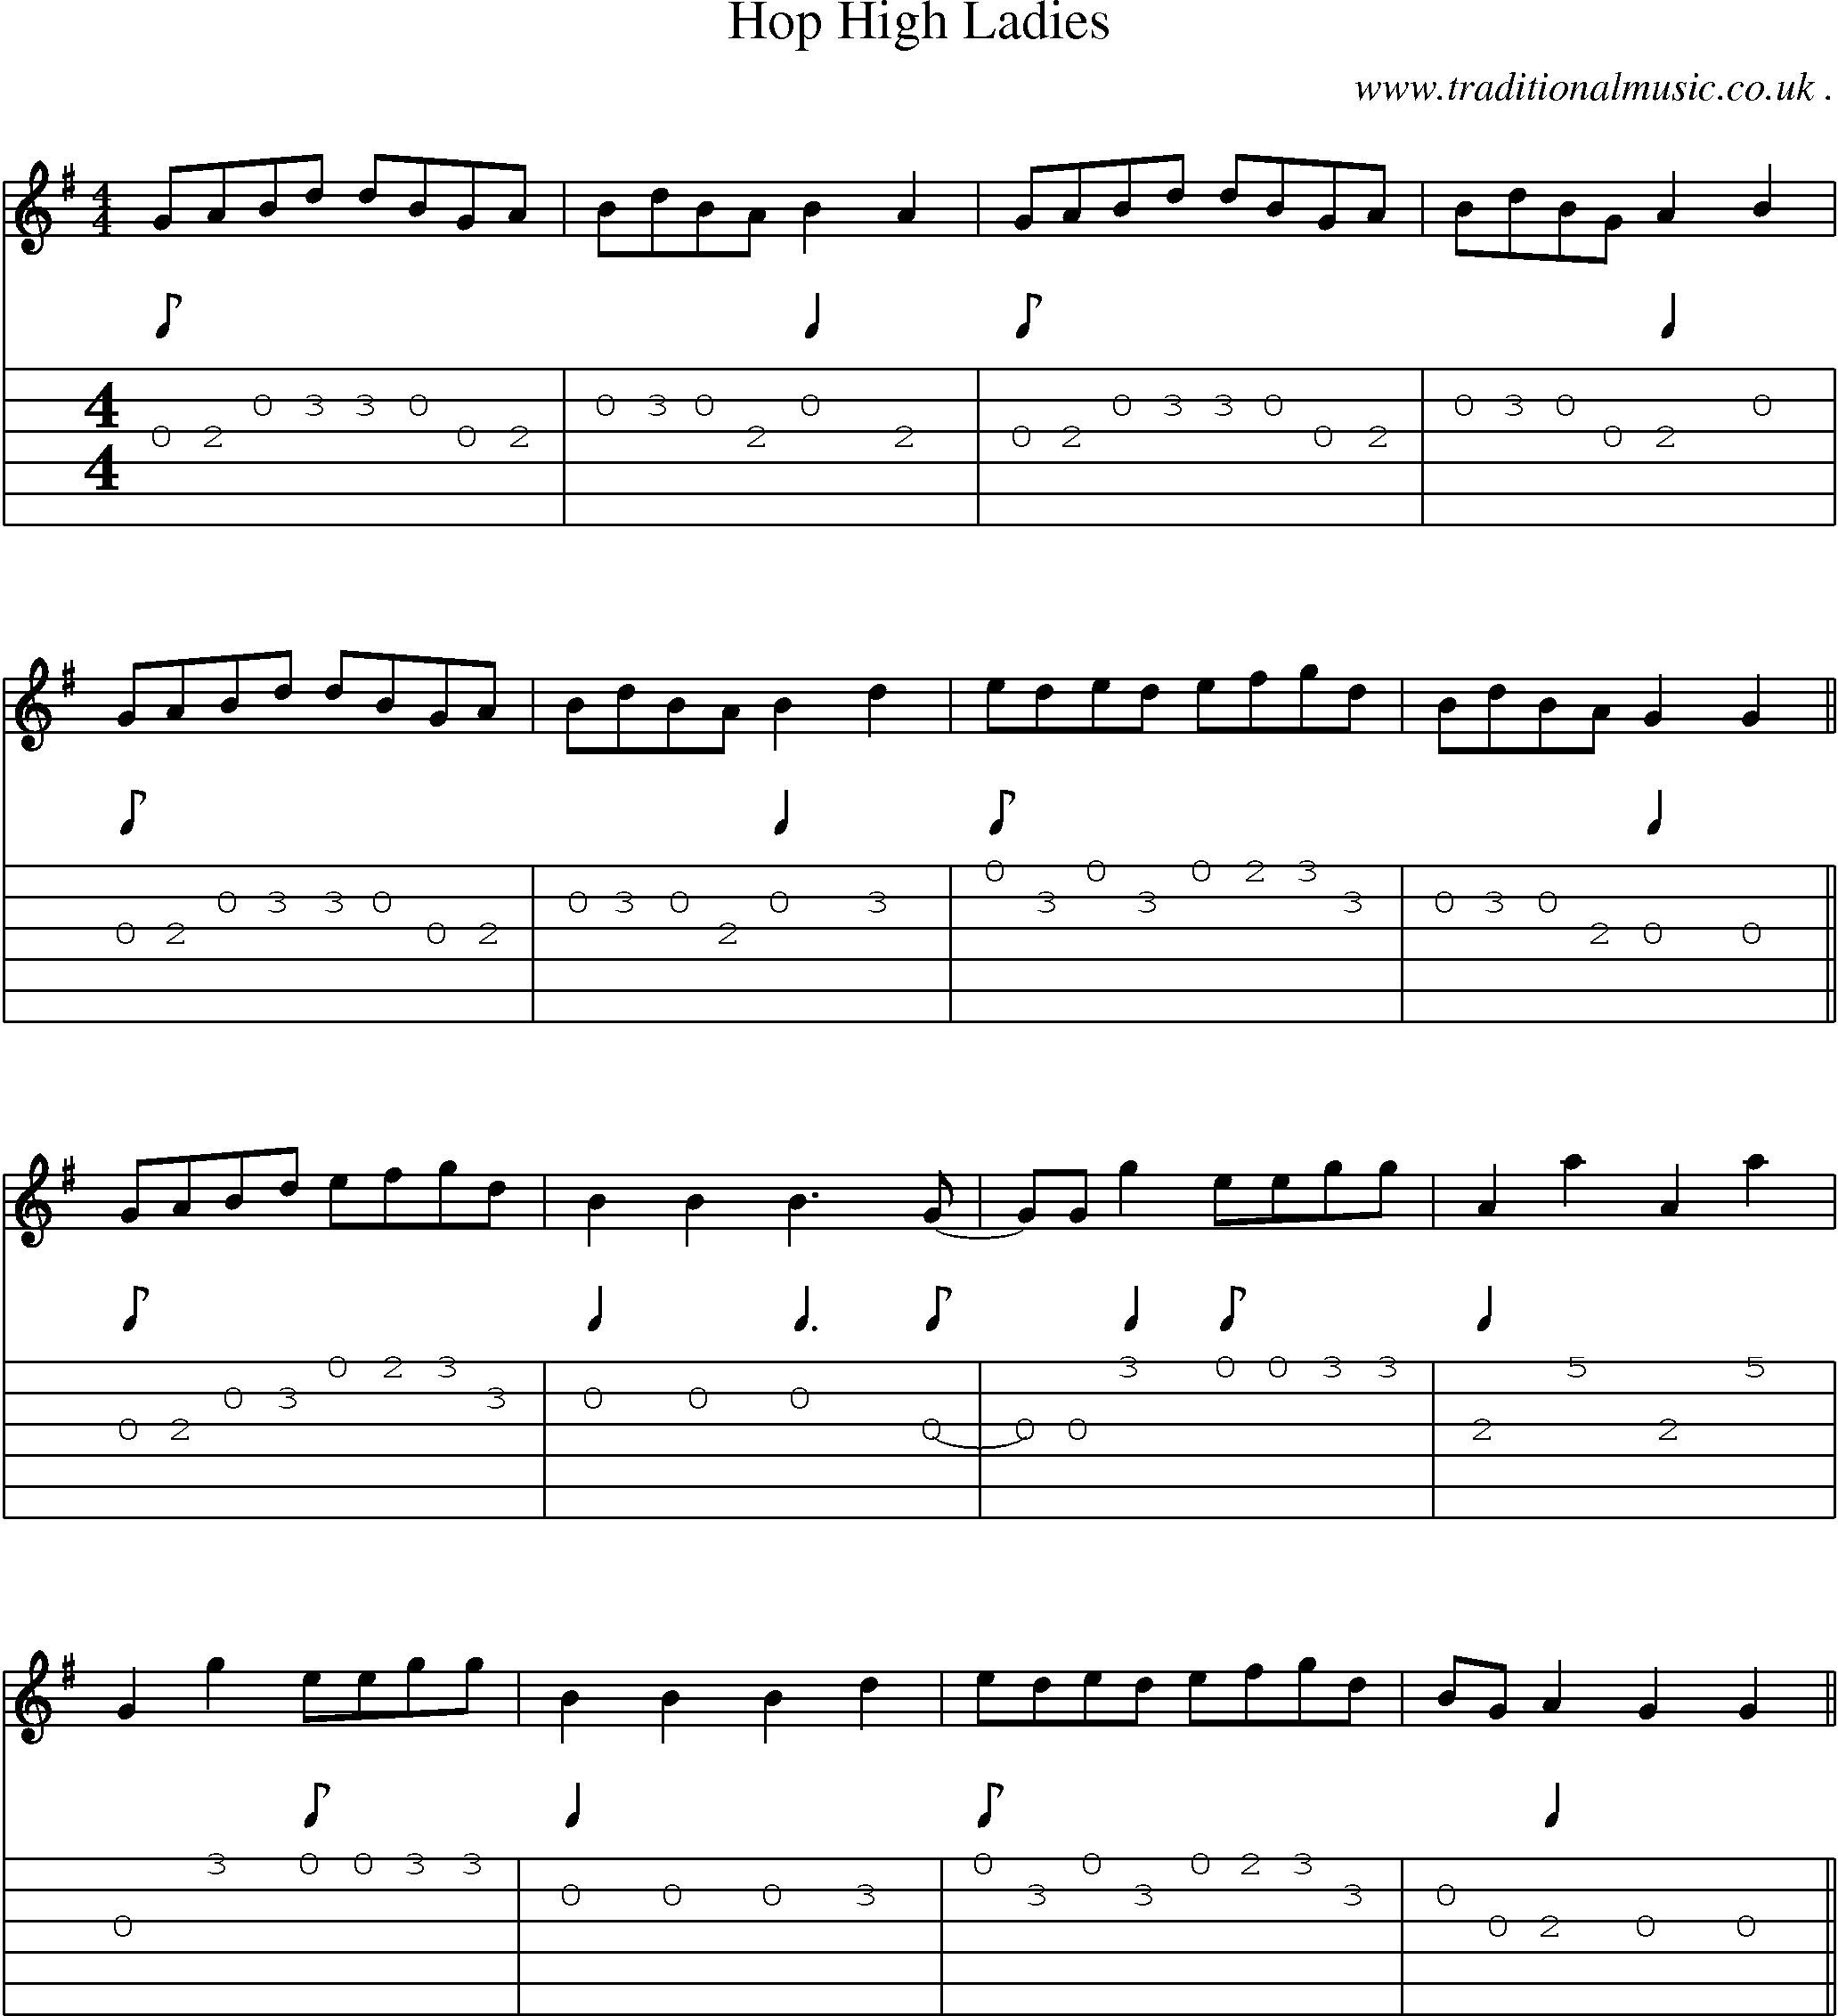 Music Score and Guitar Tabs for Hop High Ladies